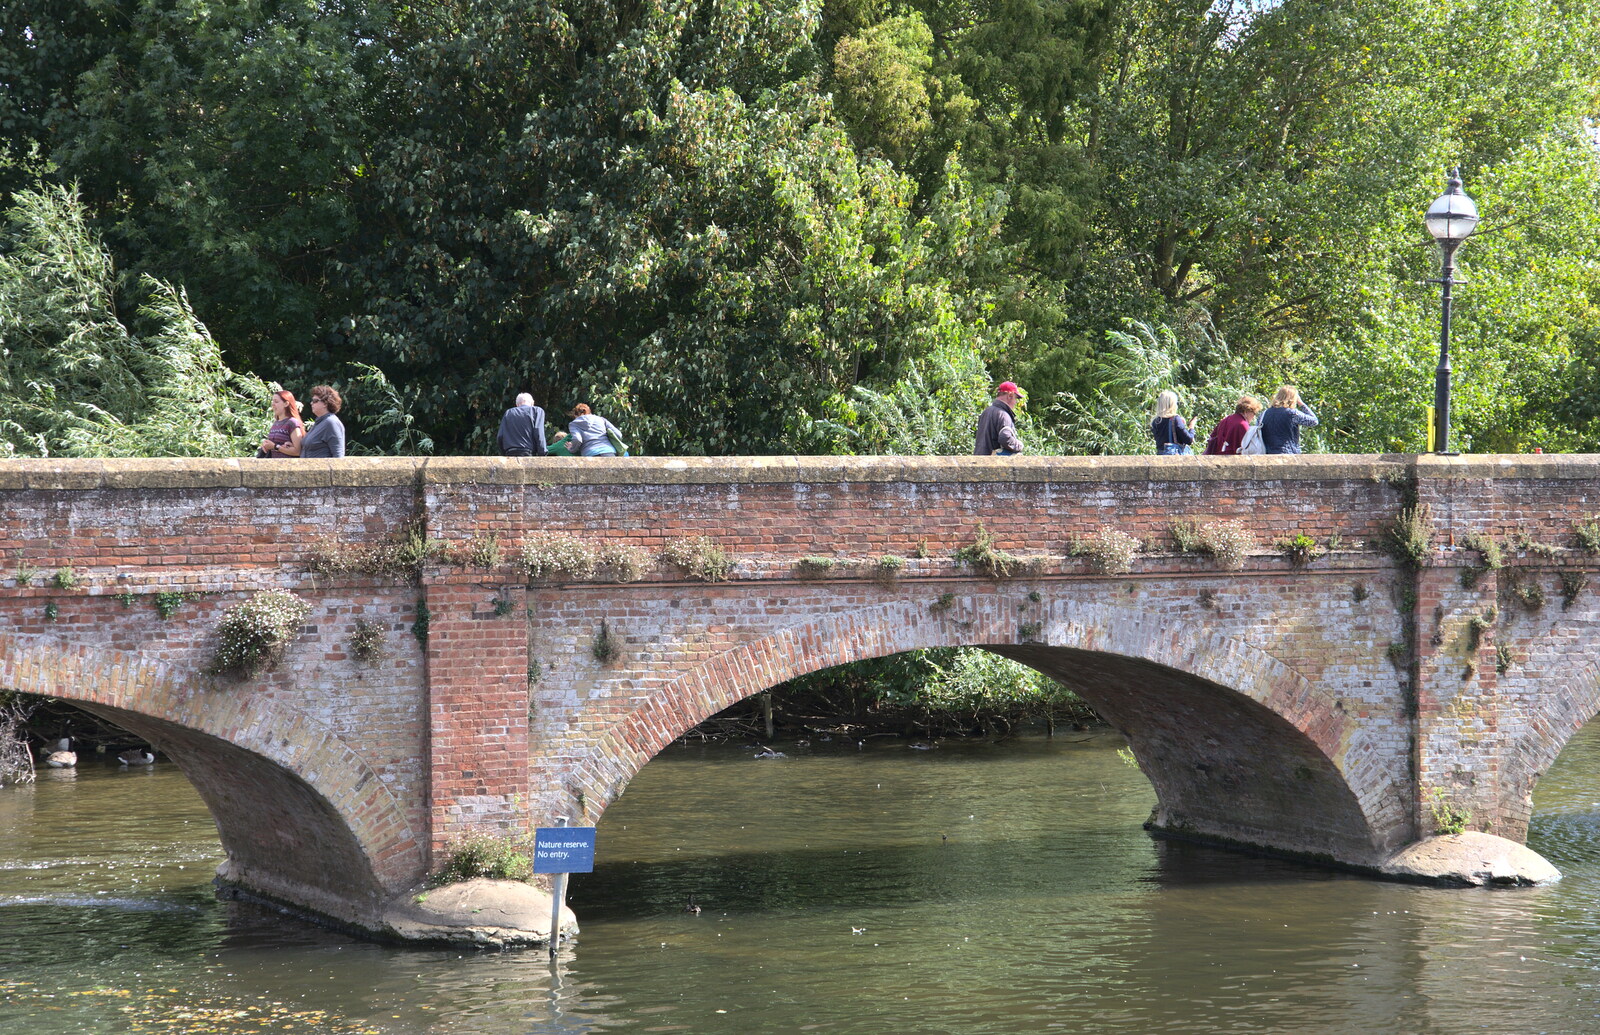 Grandad and Isobel in the bridge from A Postcard from Stratford-upon-Avon, Warwickshire - 9th September 2018